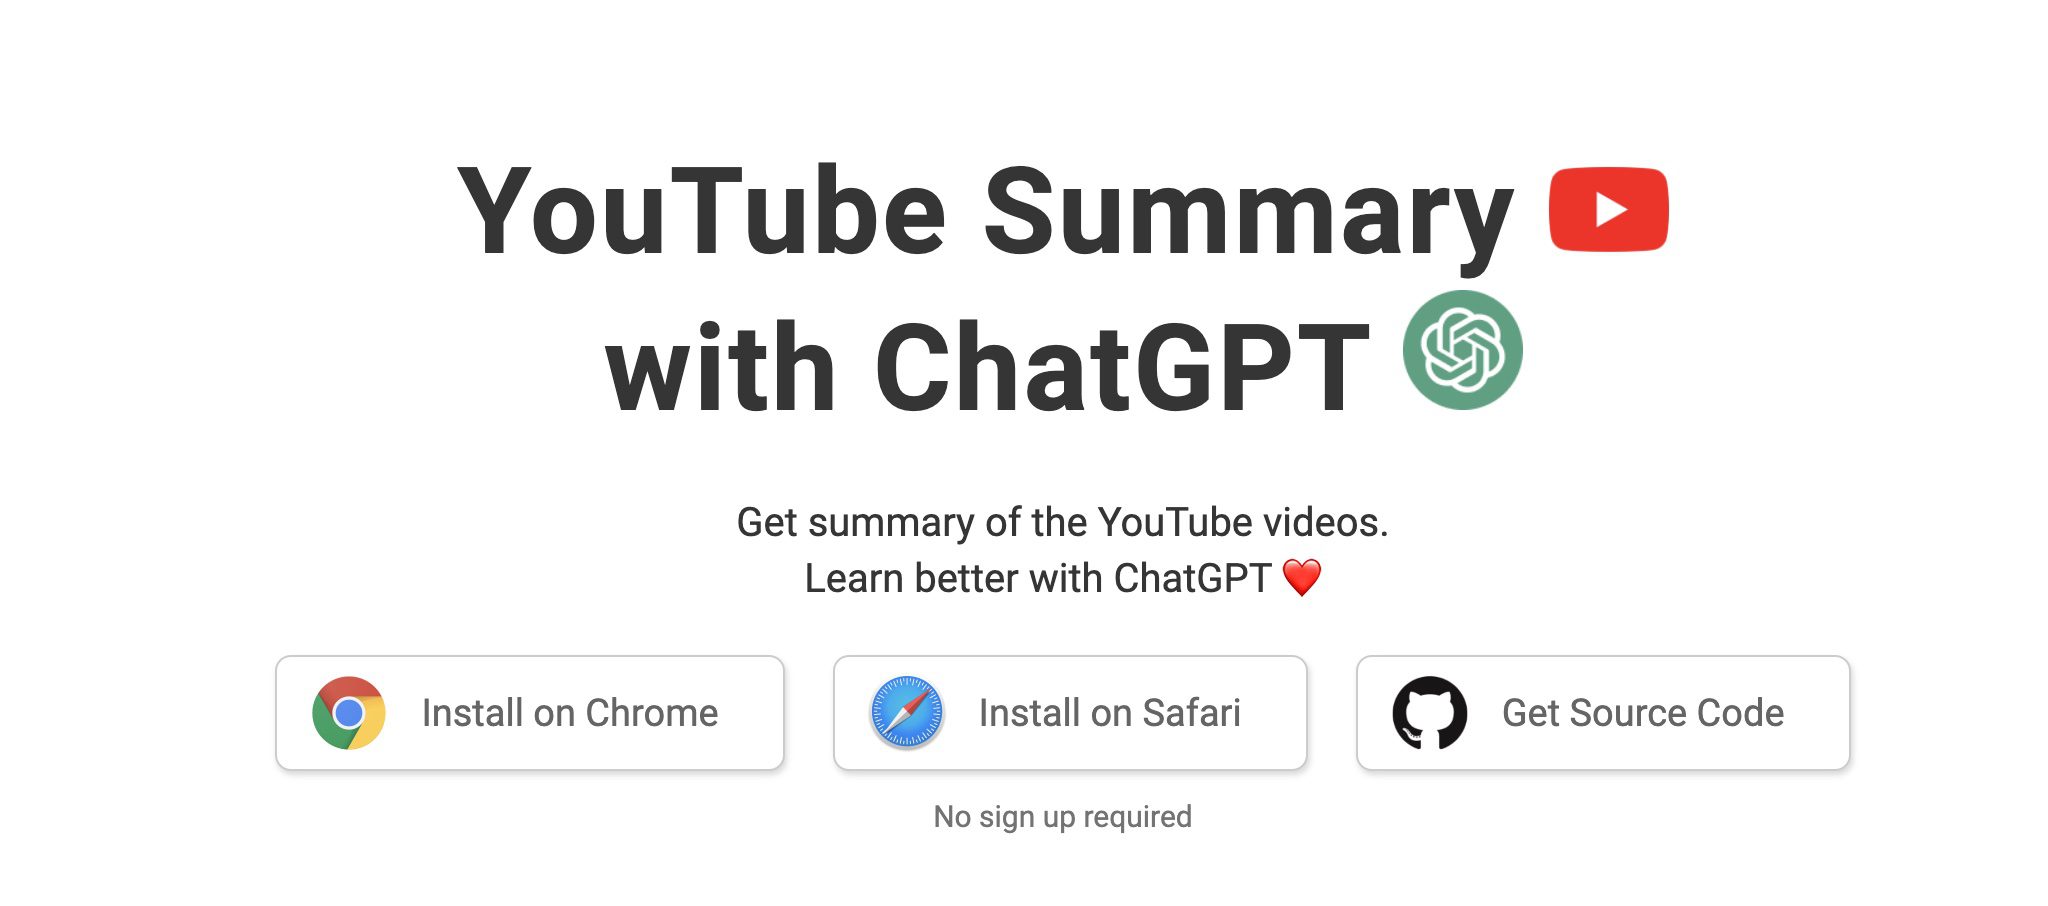 Youtube Summary with ChatGPT